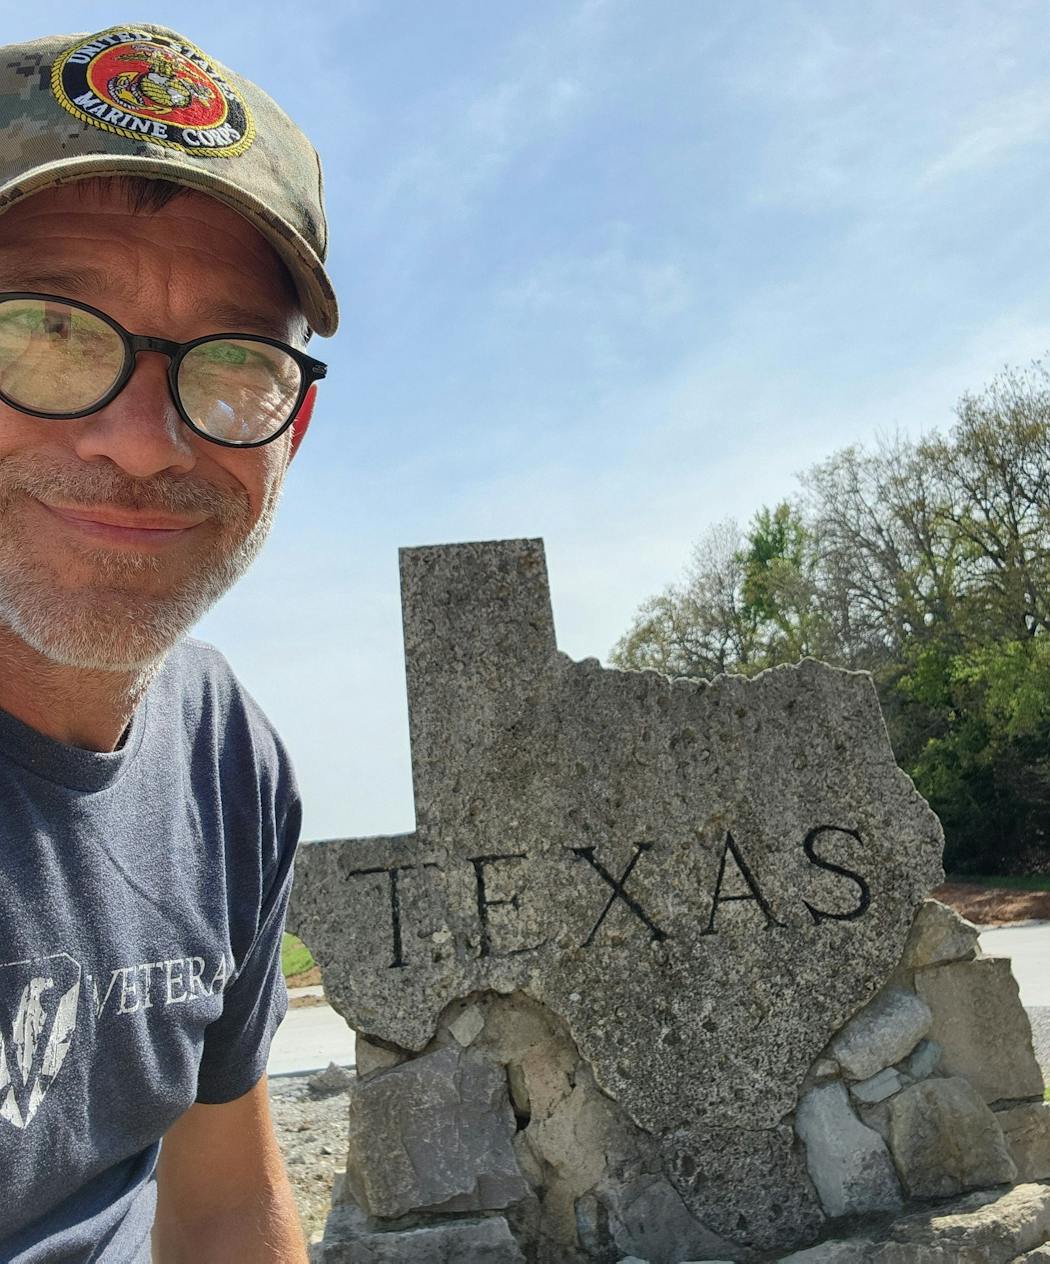 Daniel Crawford walked to Texas to raise awareness of 23rd Veteran, a program that helps vets deal with lingering trauma.